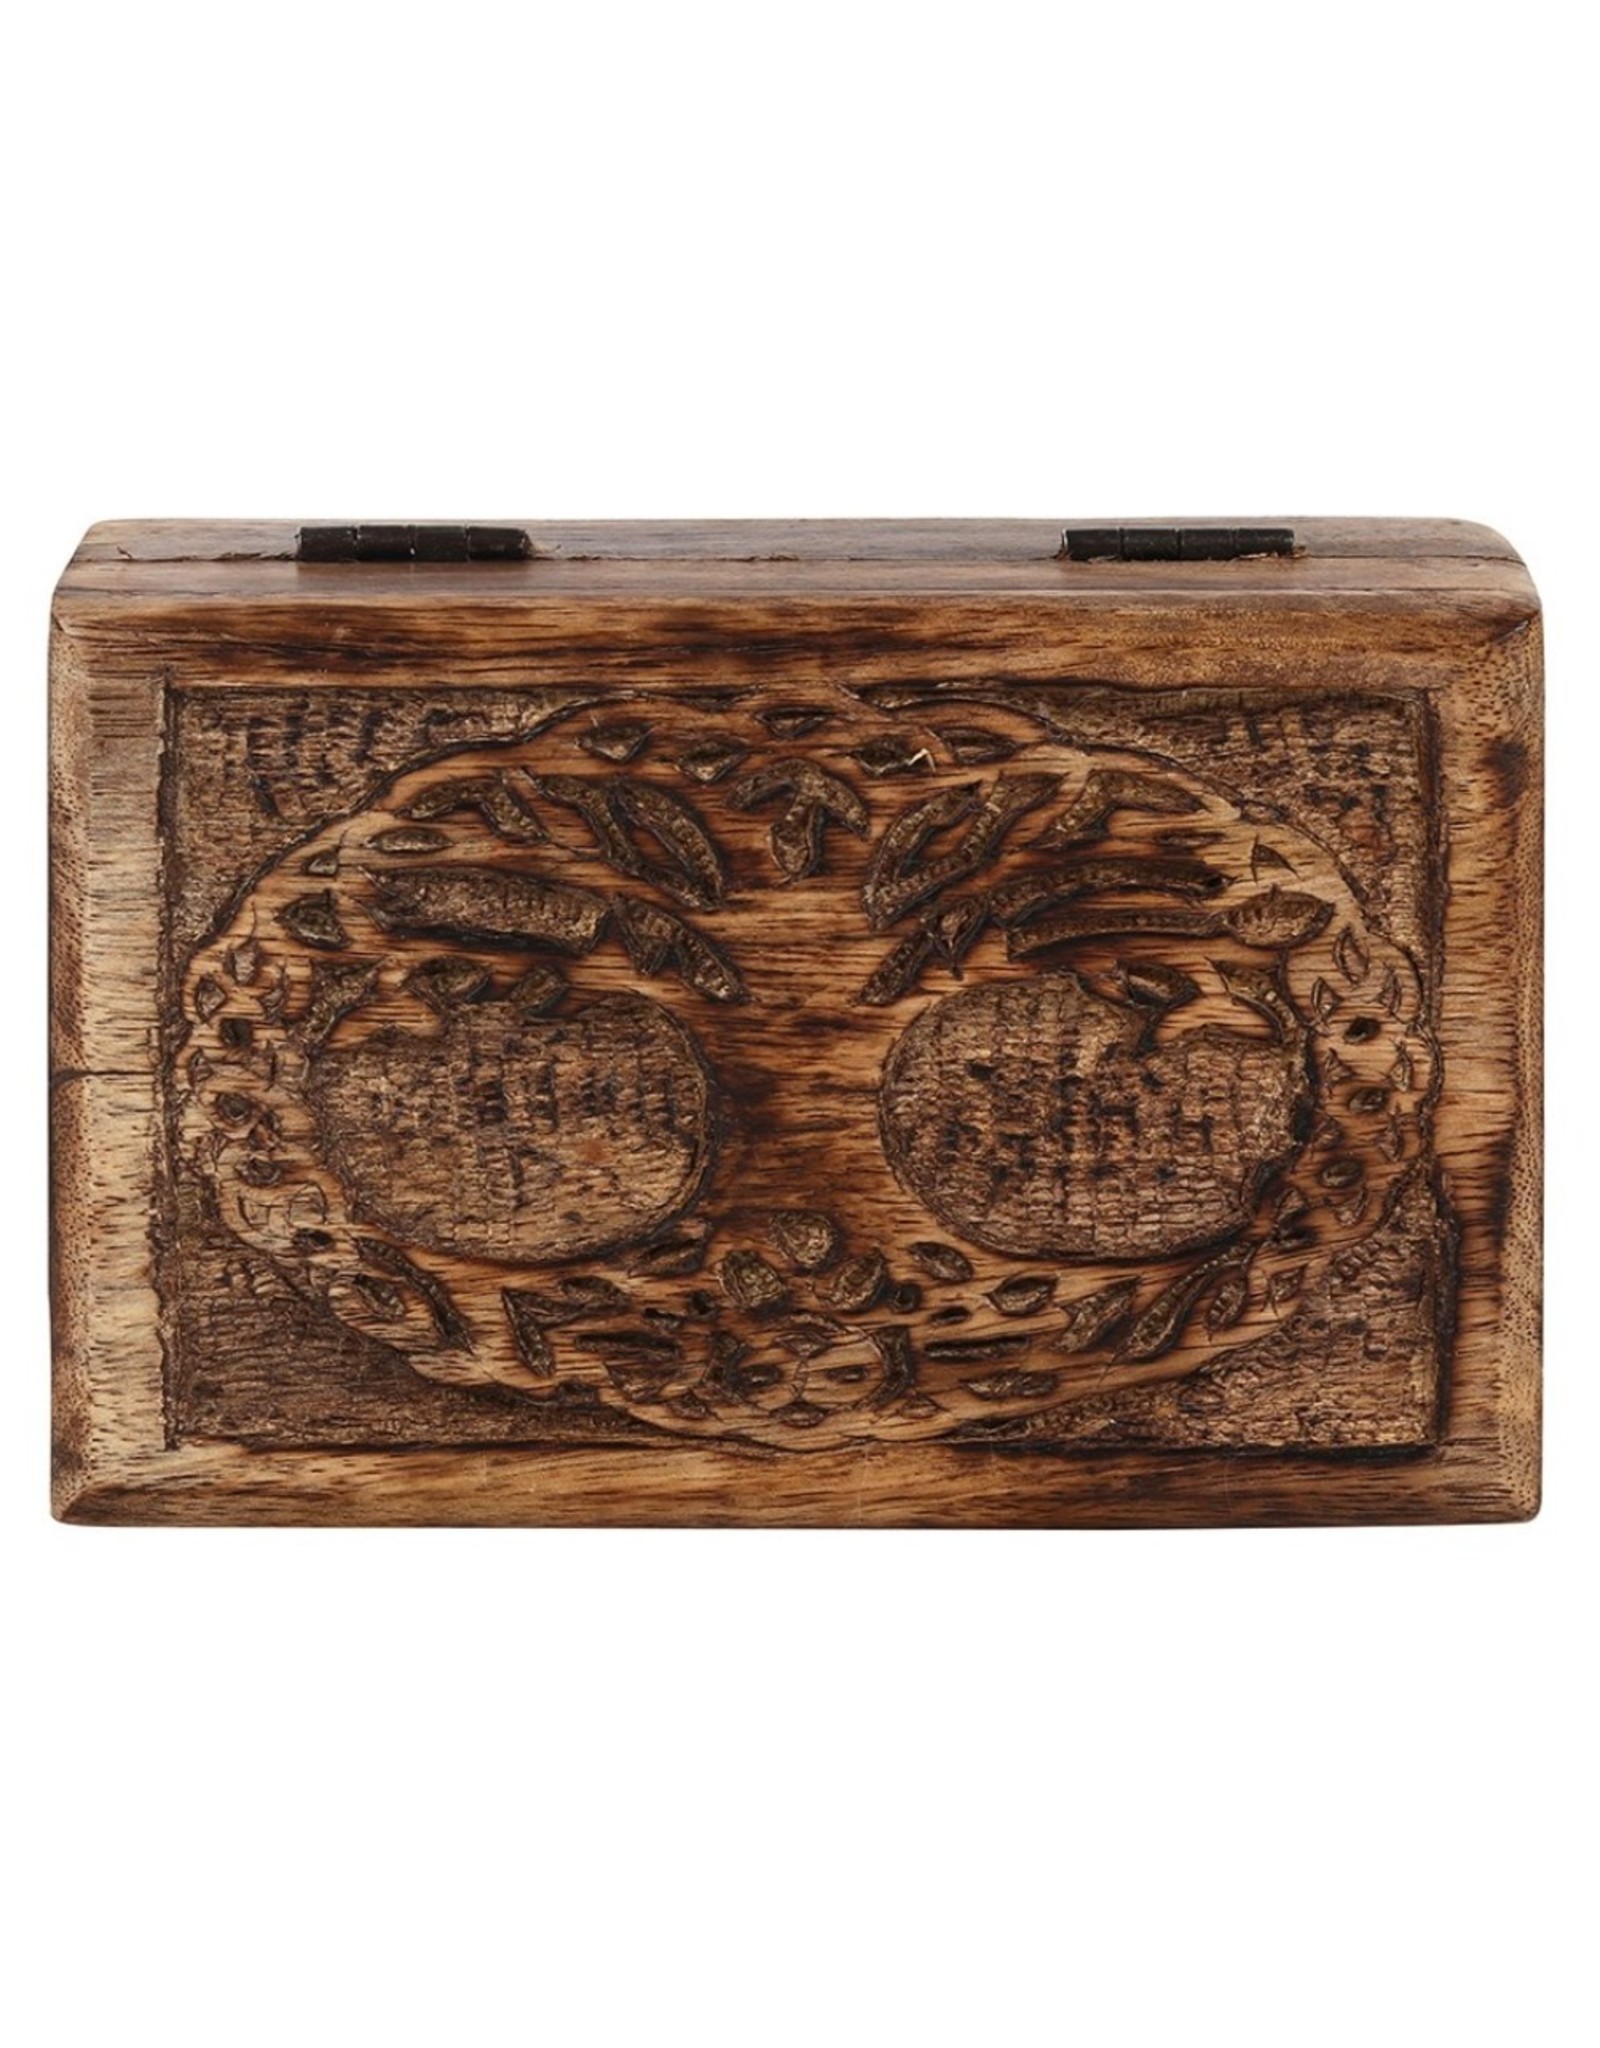 SMD Miscellaneous - Wooden Tree of Life box 15cm x 10cm